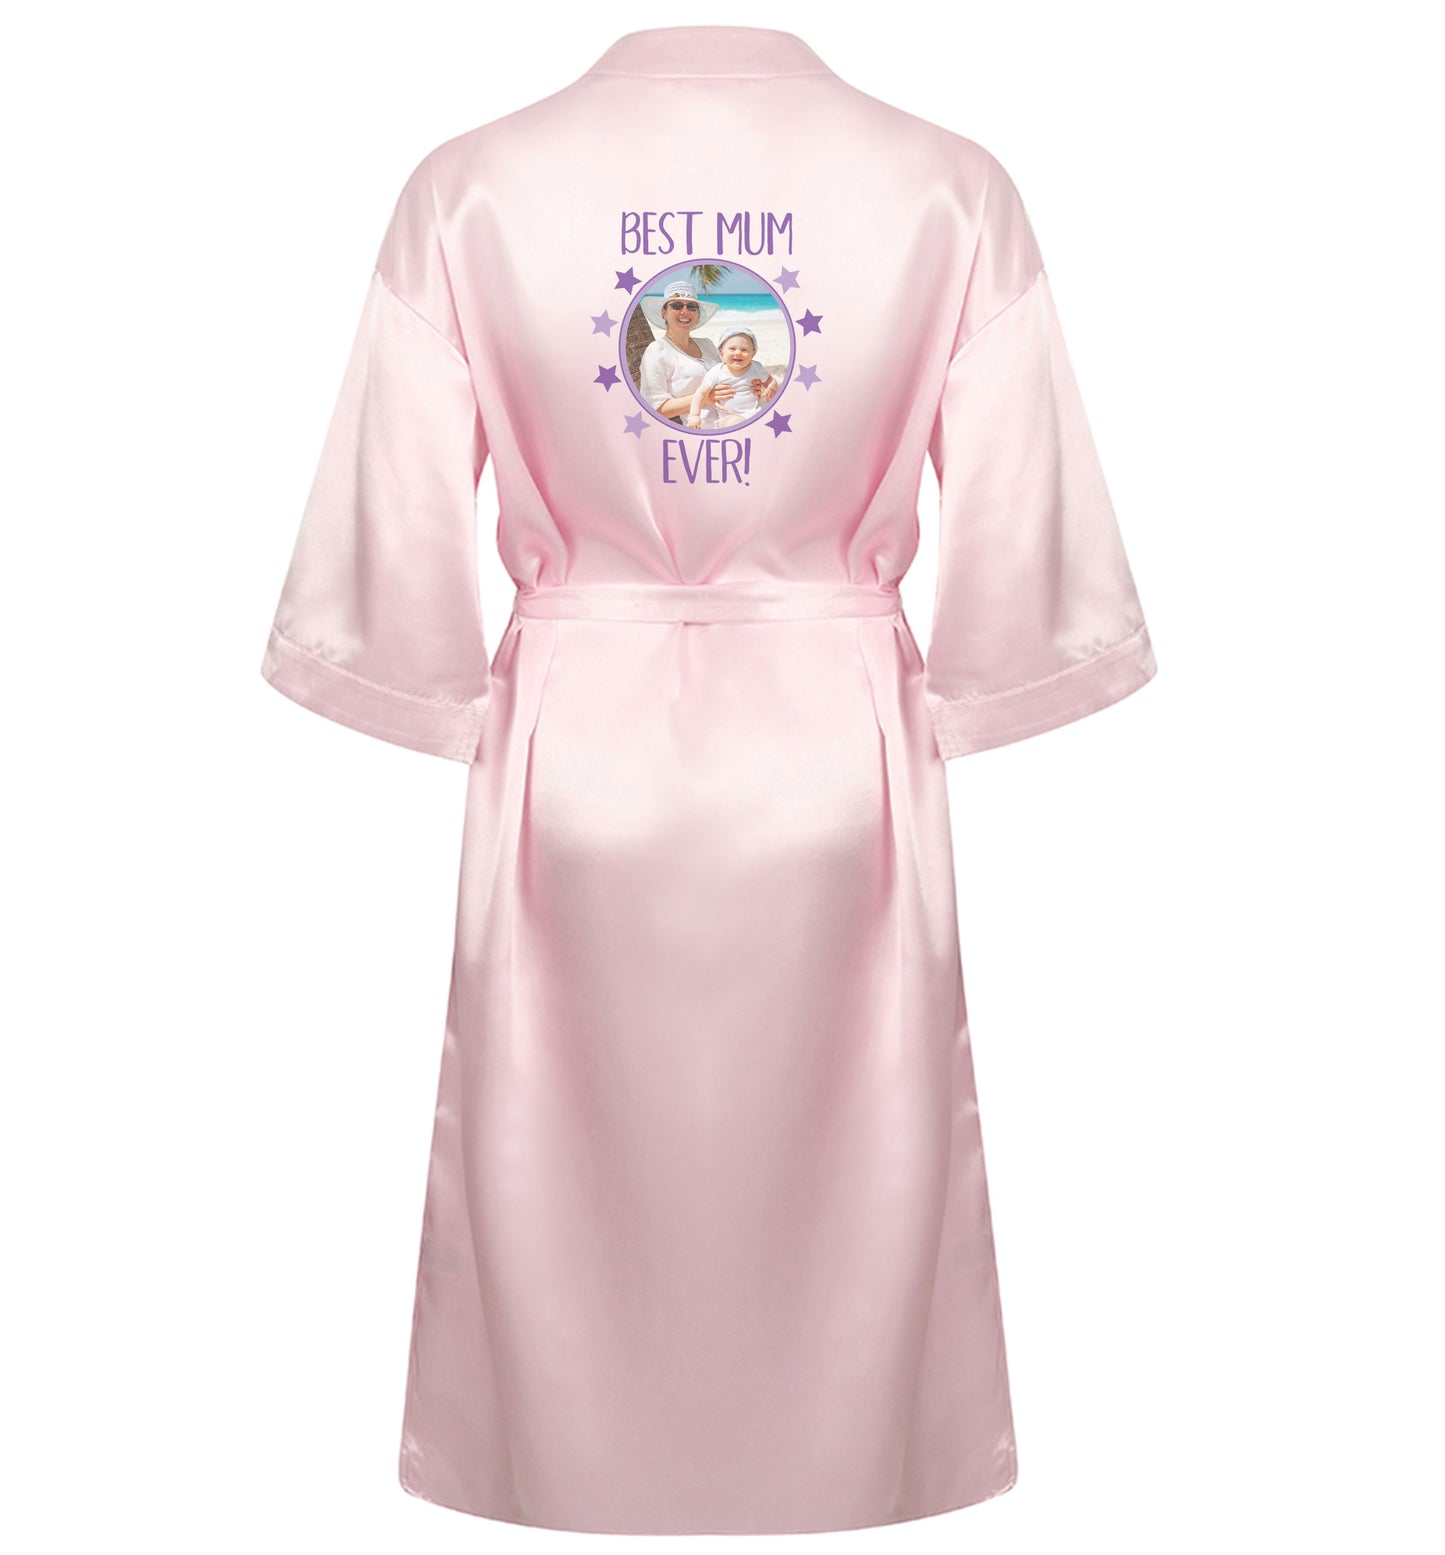 Personalised gift for mother's day use your own photo! Best mum ever! XL/XXL pink  ladies dressing gown size 16/18